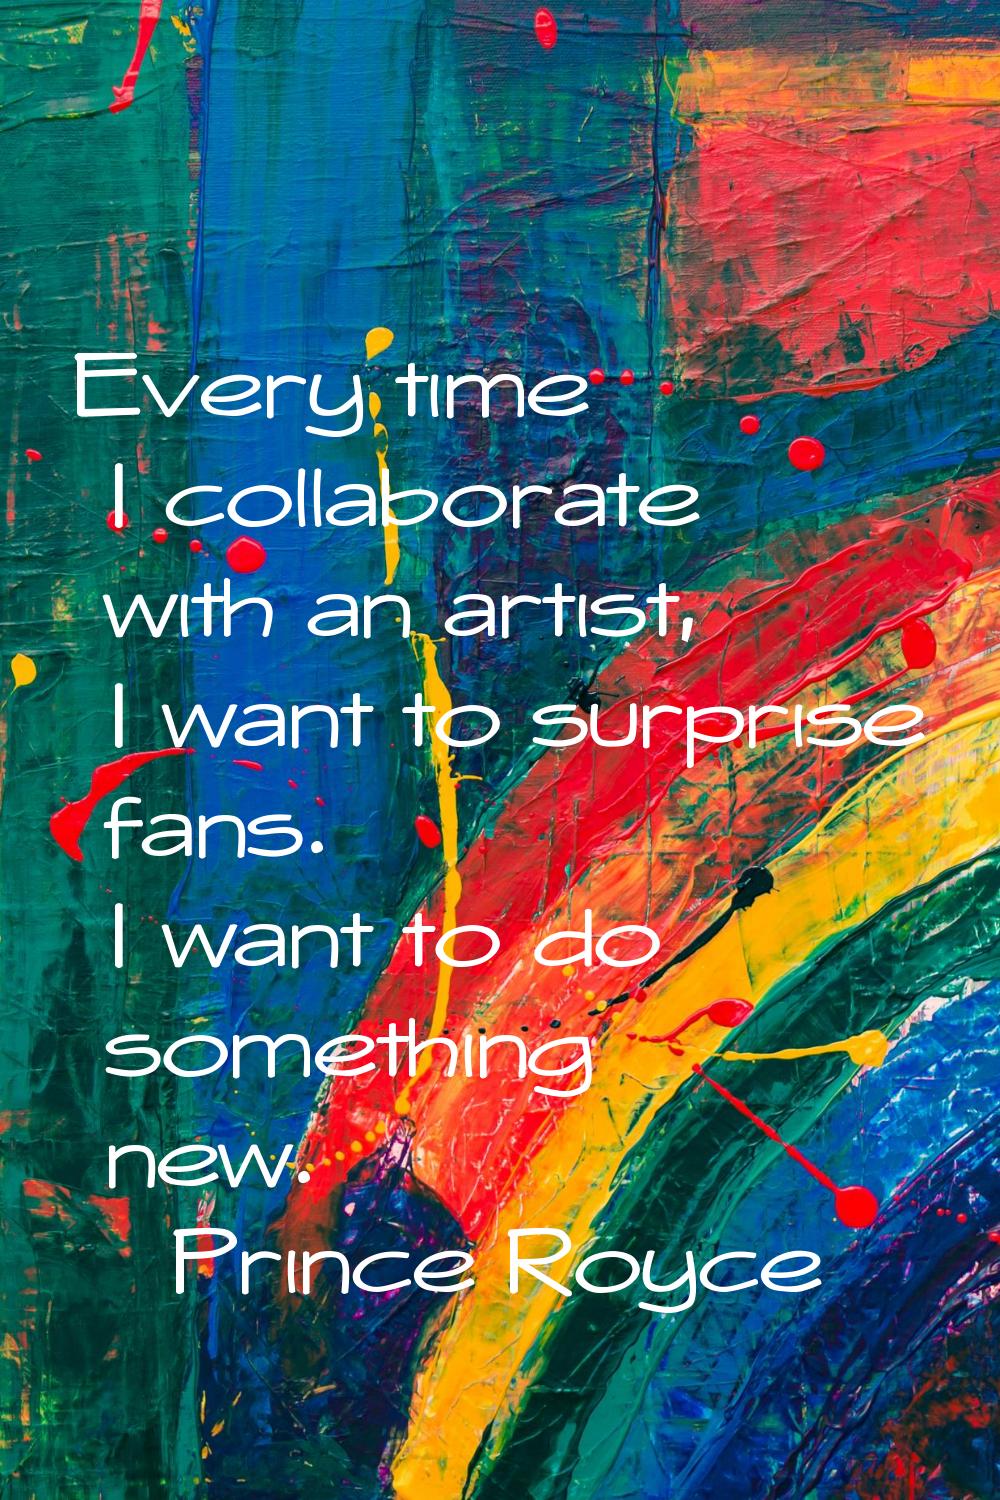 Every time I collaborate with an artist, I want to surprise fans. I want to do something new.